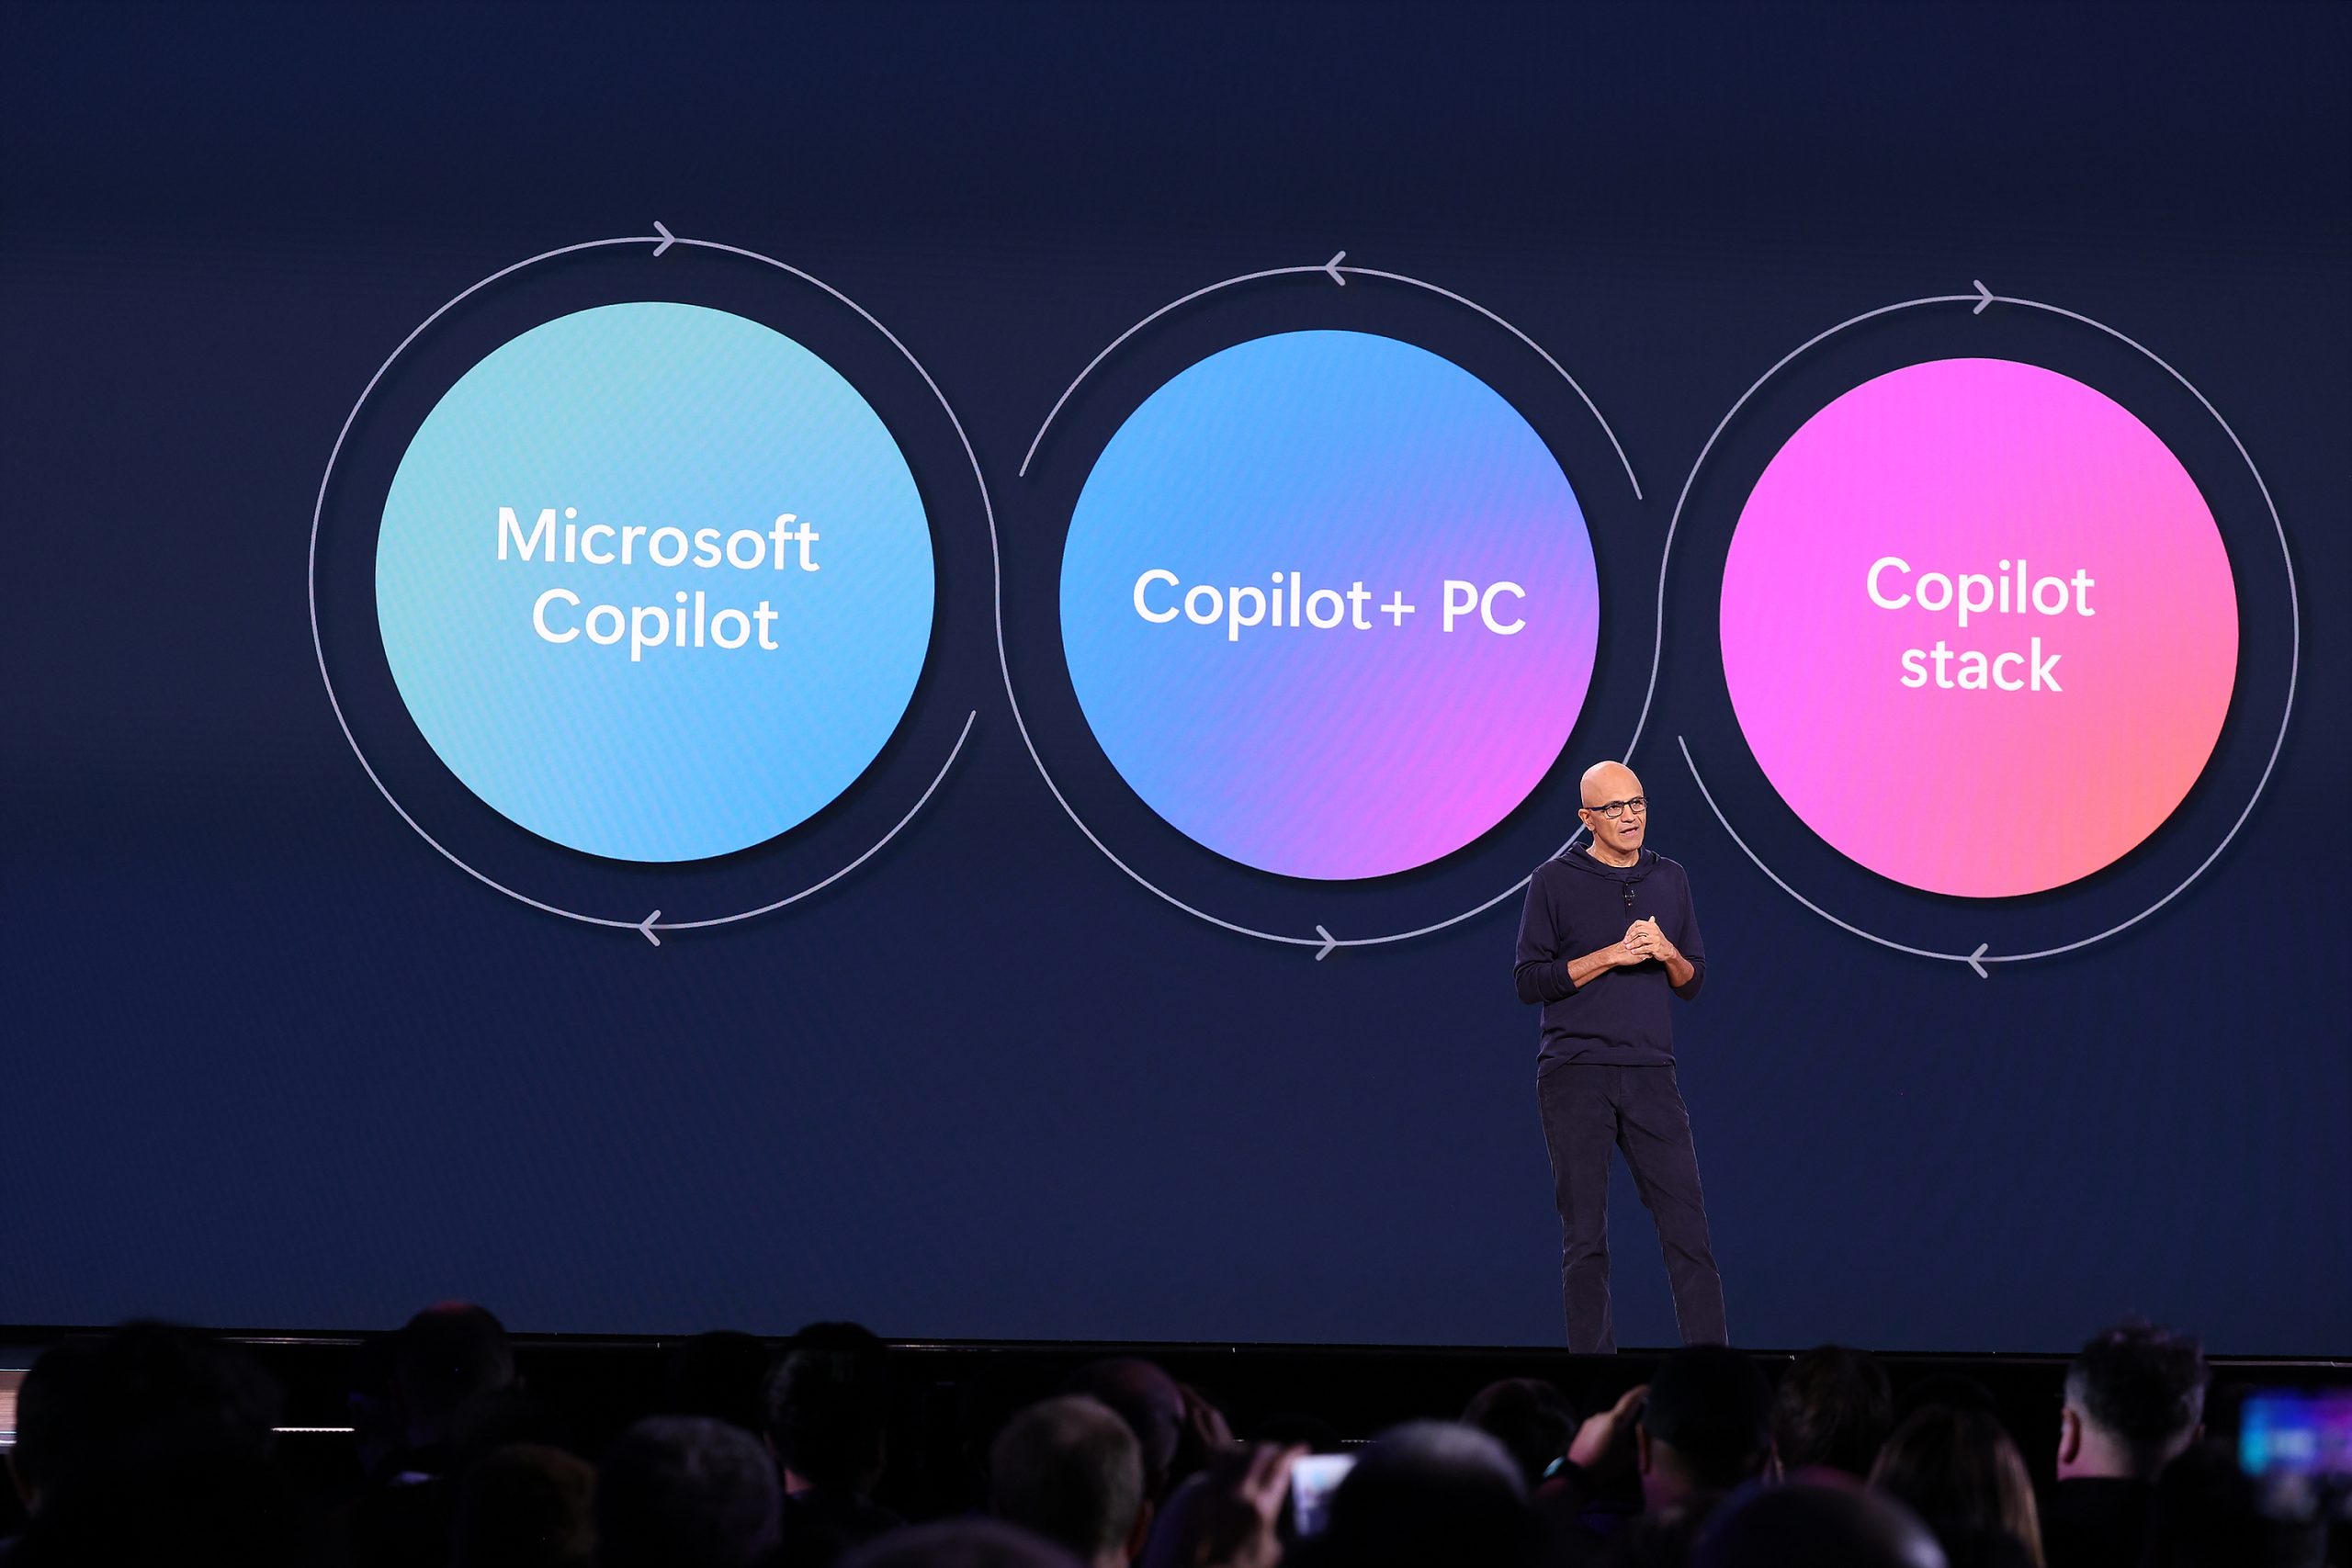 A man standing on stage in front of an audience with text and logos on a screen behind him for Microsoft Copilot, Copilot+ PC and Copilot stack